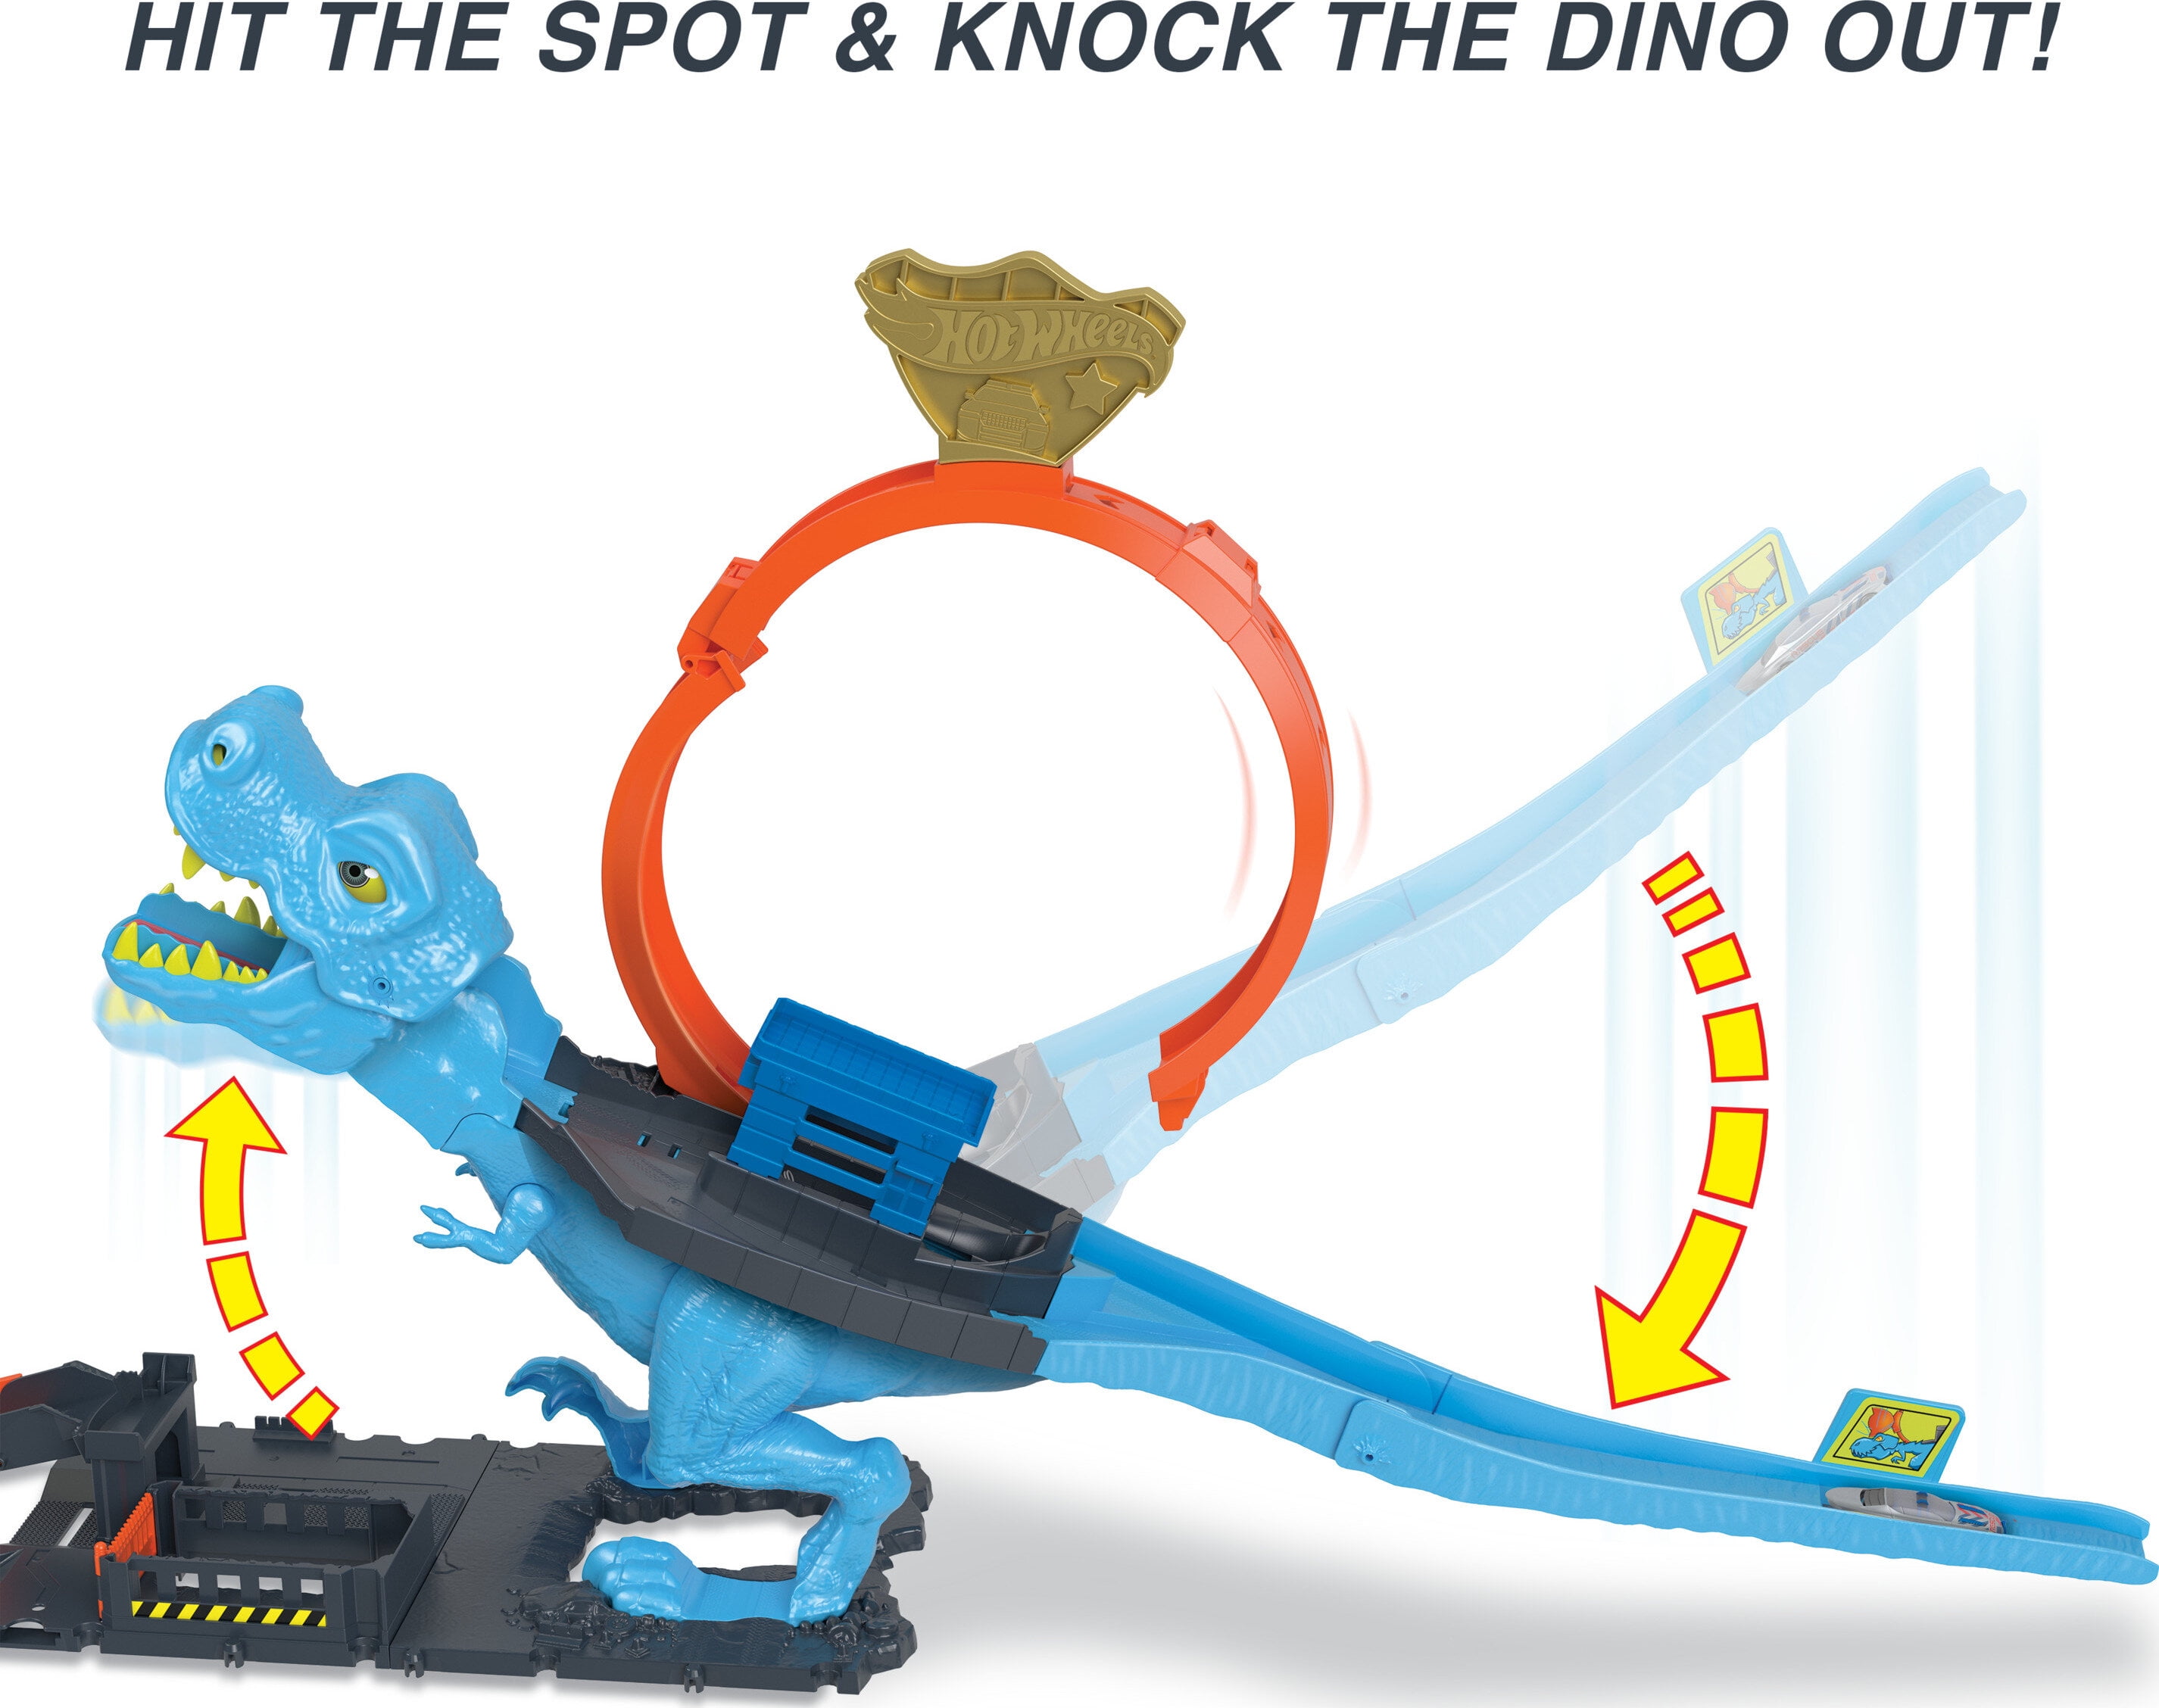 Hot Wheels City T-Rex Chomp-Down Track Set with a Huge Loop & 1:64 Scale  Toy Car 